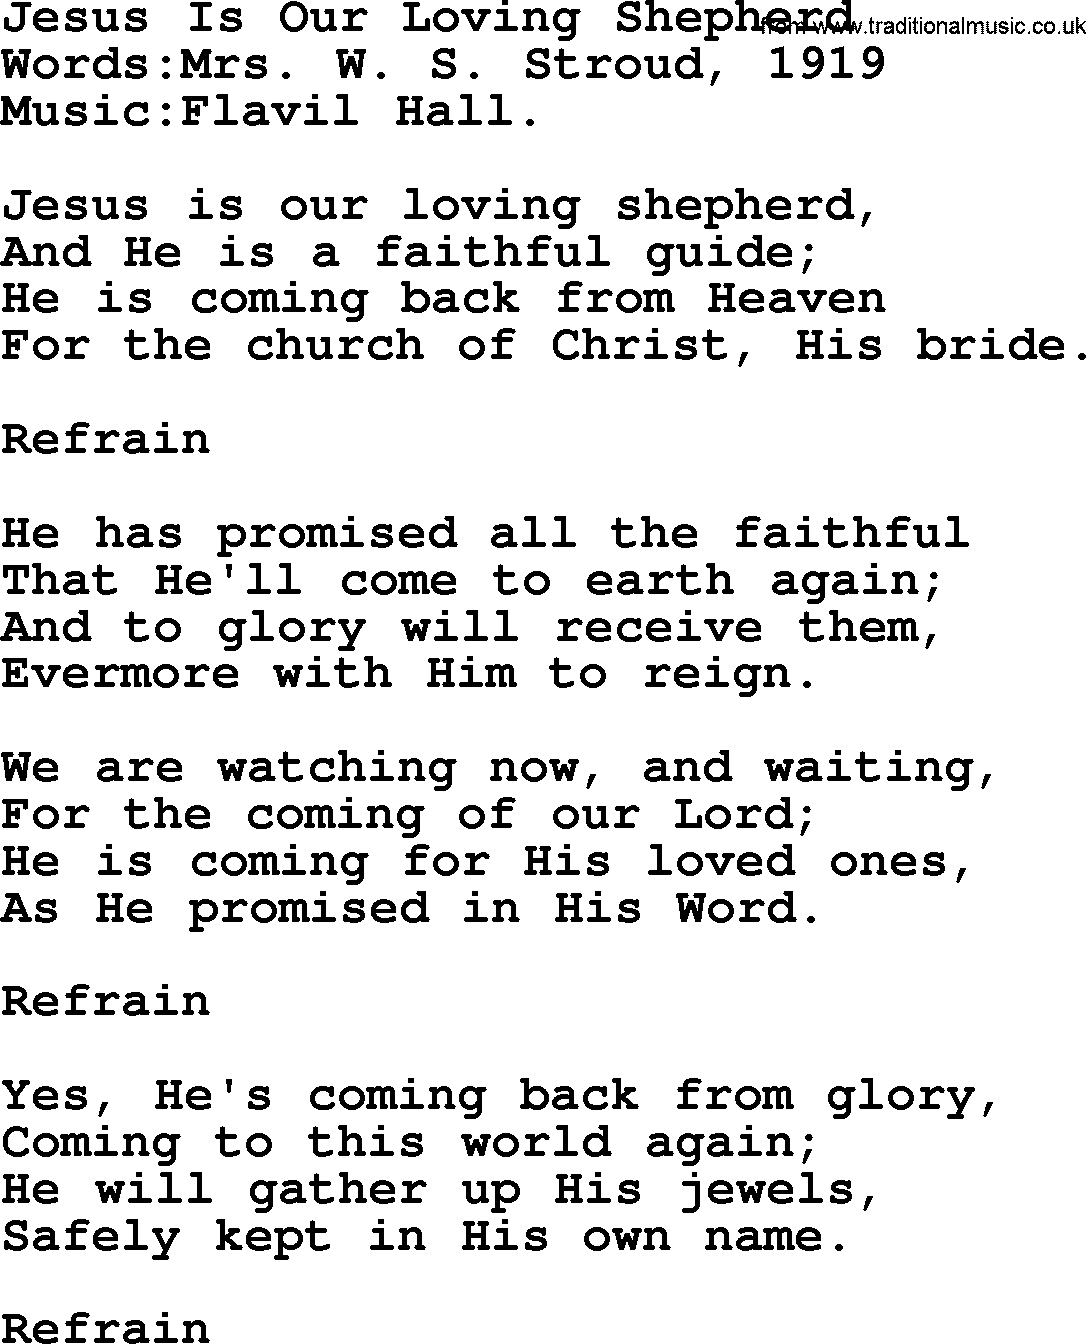 Christian hymns and songs about Jesus' Return(The Second Coming): Jesus Is Our Loving Shepherd, lyrics with PDF